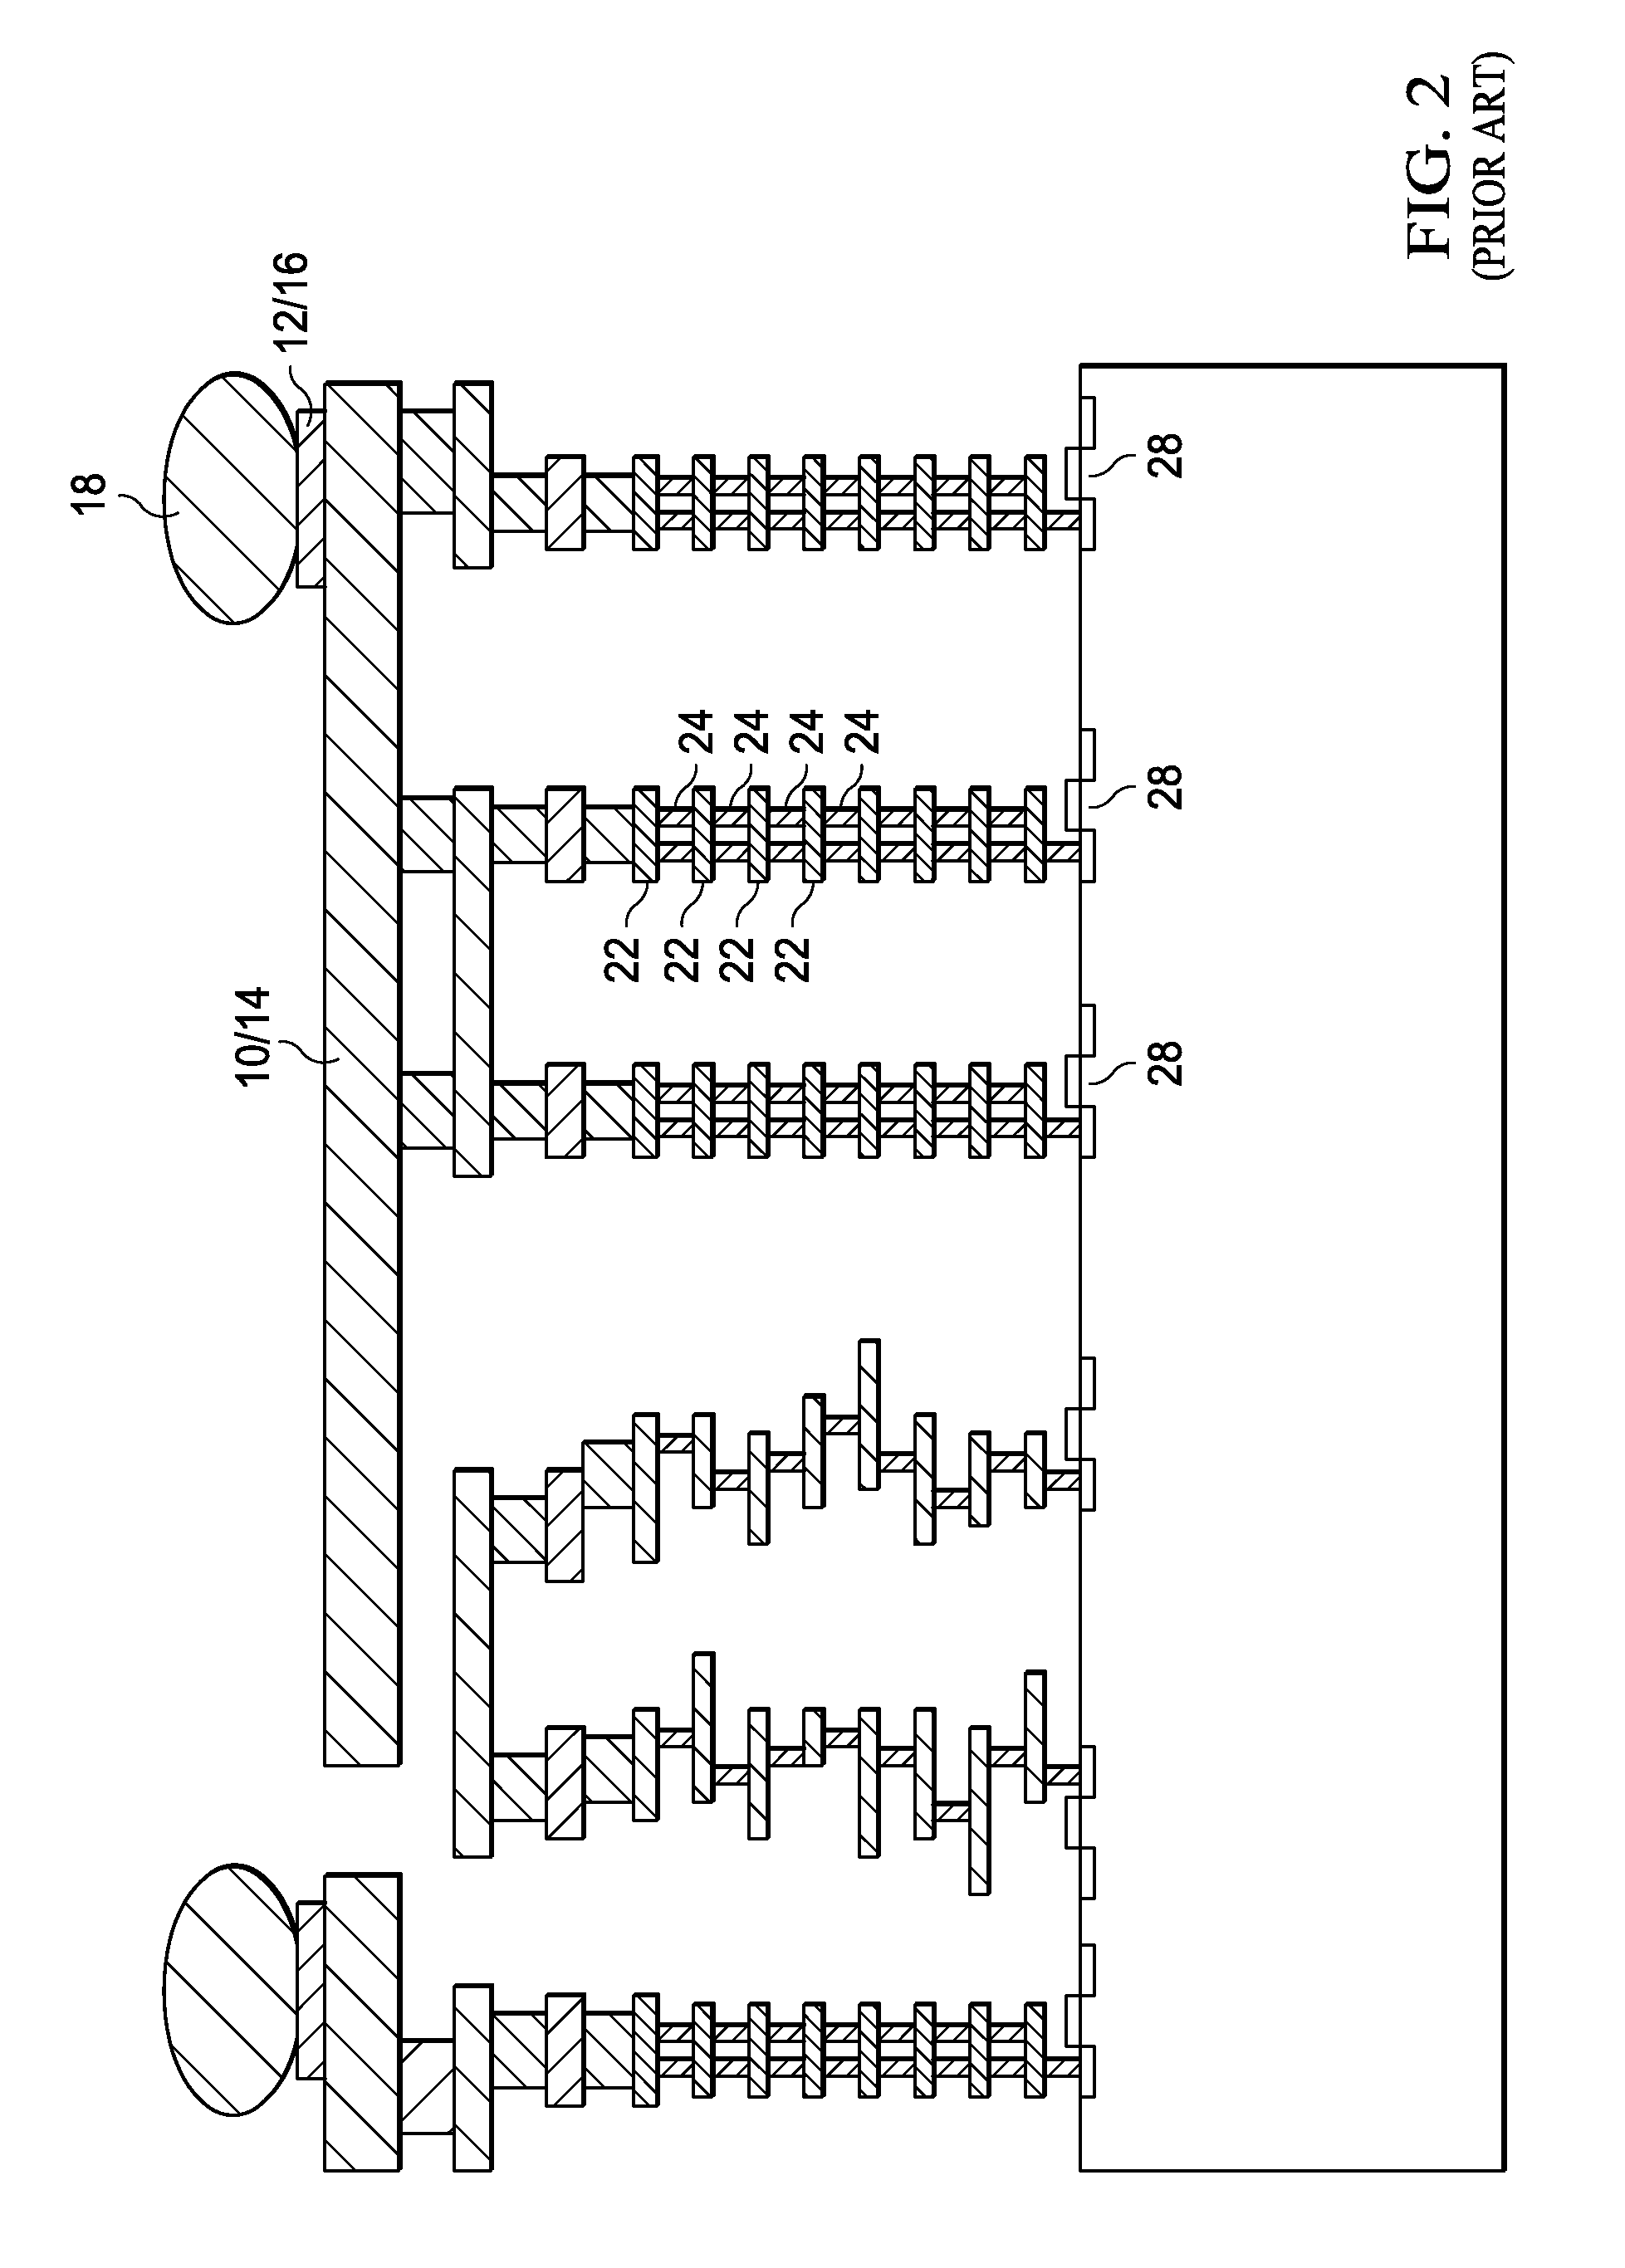 Supplying Power to Integrated Circuits Using a Grid Matrix Formed of Through-Silicon Vias